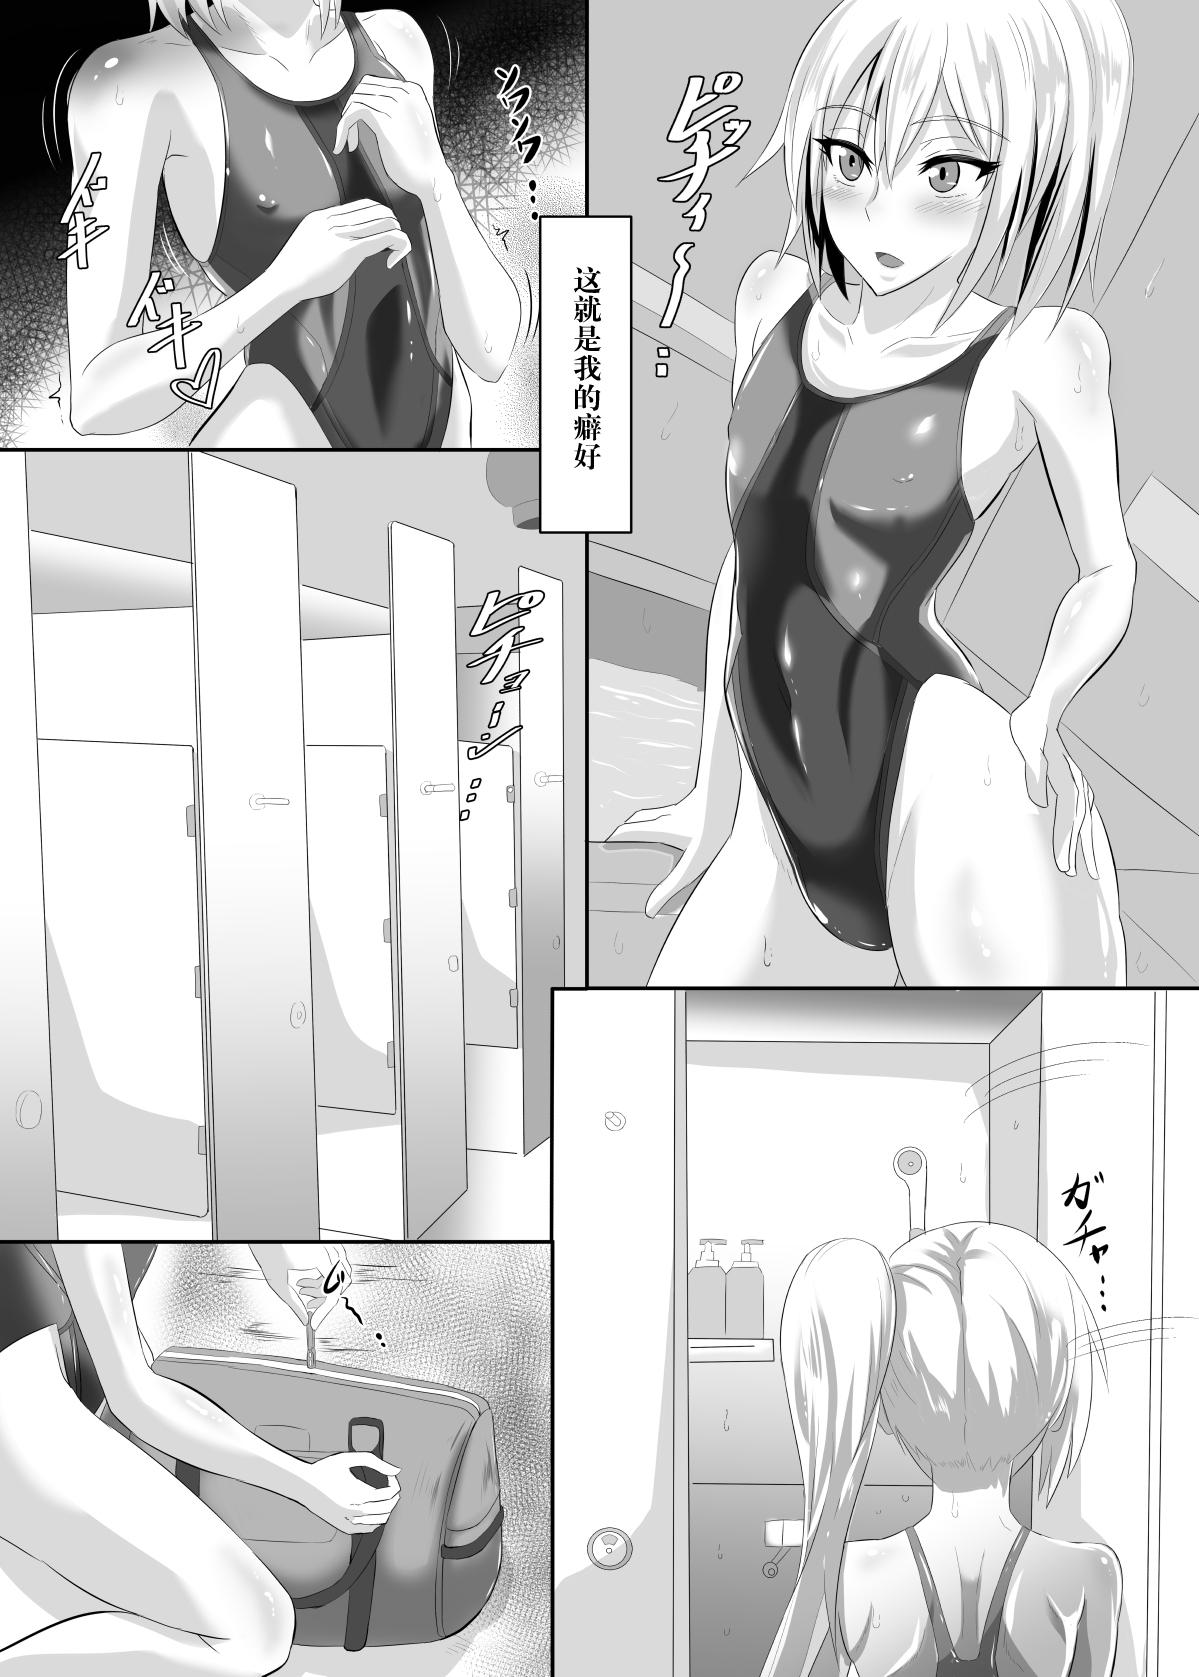 Homemade Gehenna 6 - Fate grand order Teen Sex - Page 11